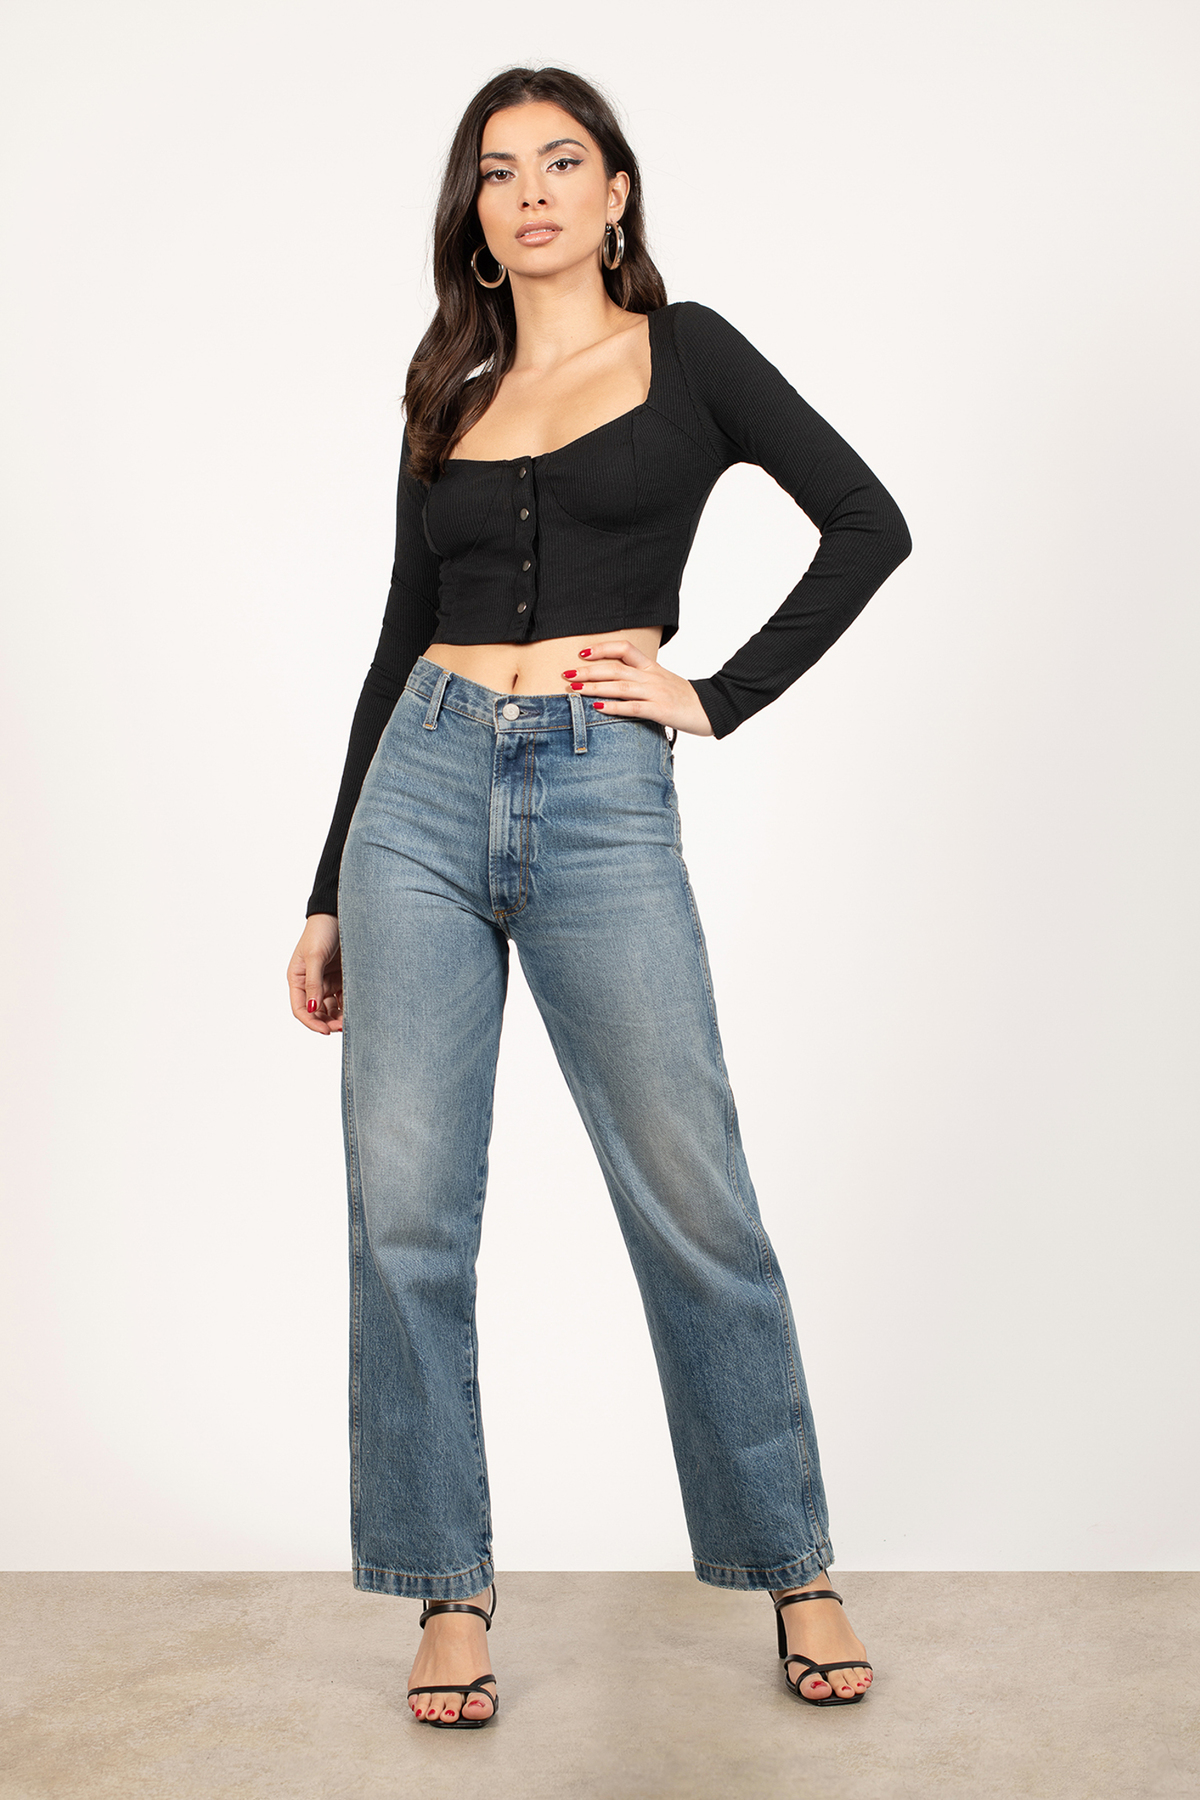 Black Top - Ribbed Button Up Top - Snap Button Closure Top